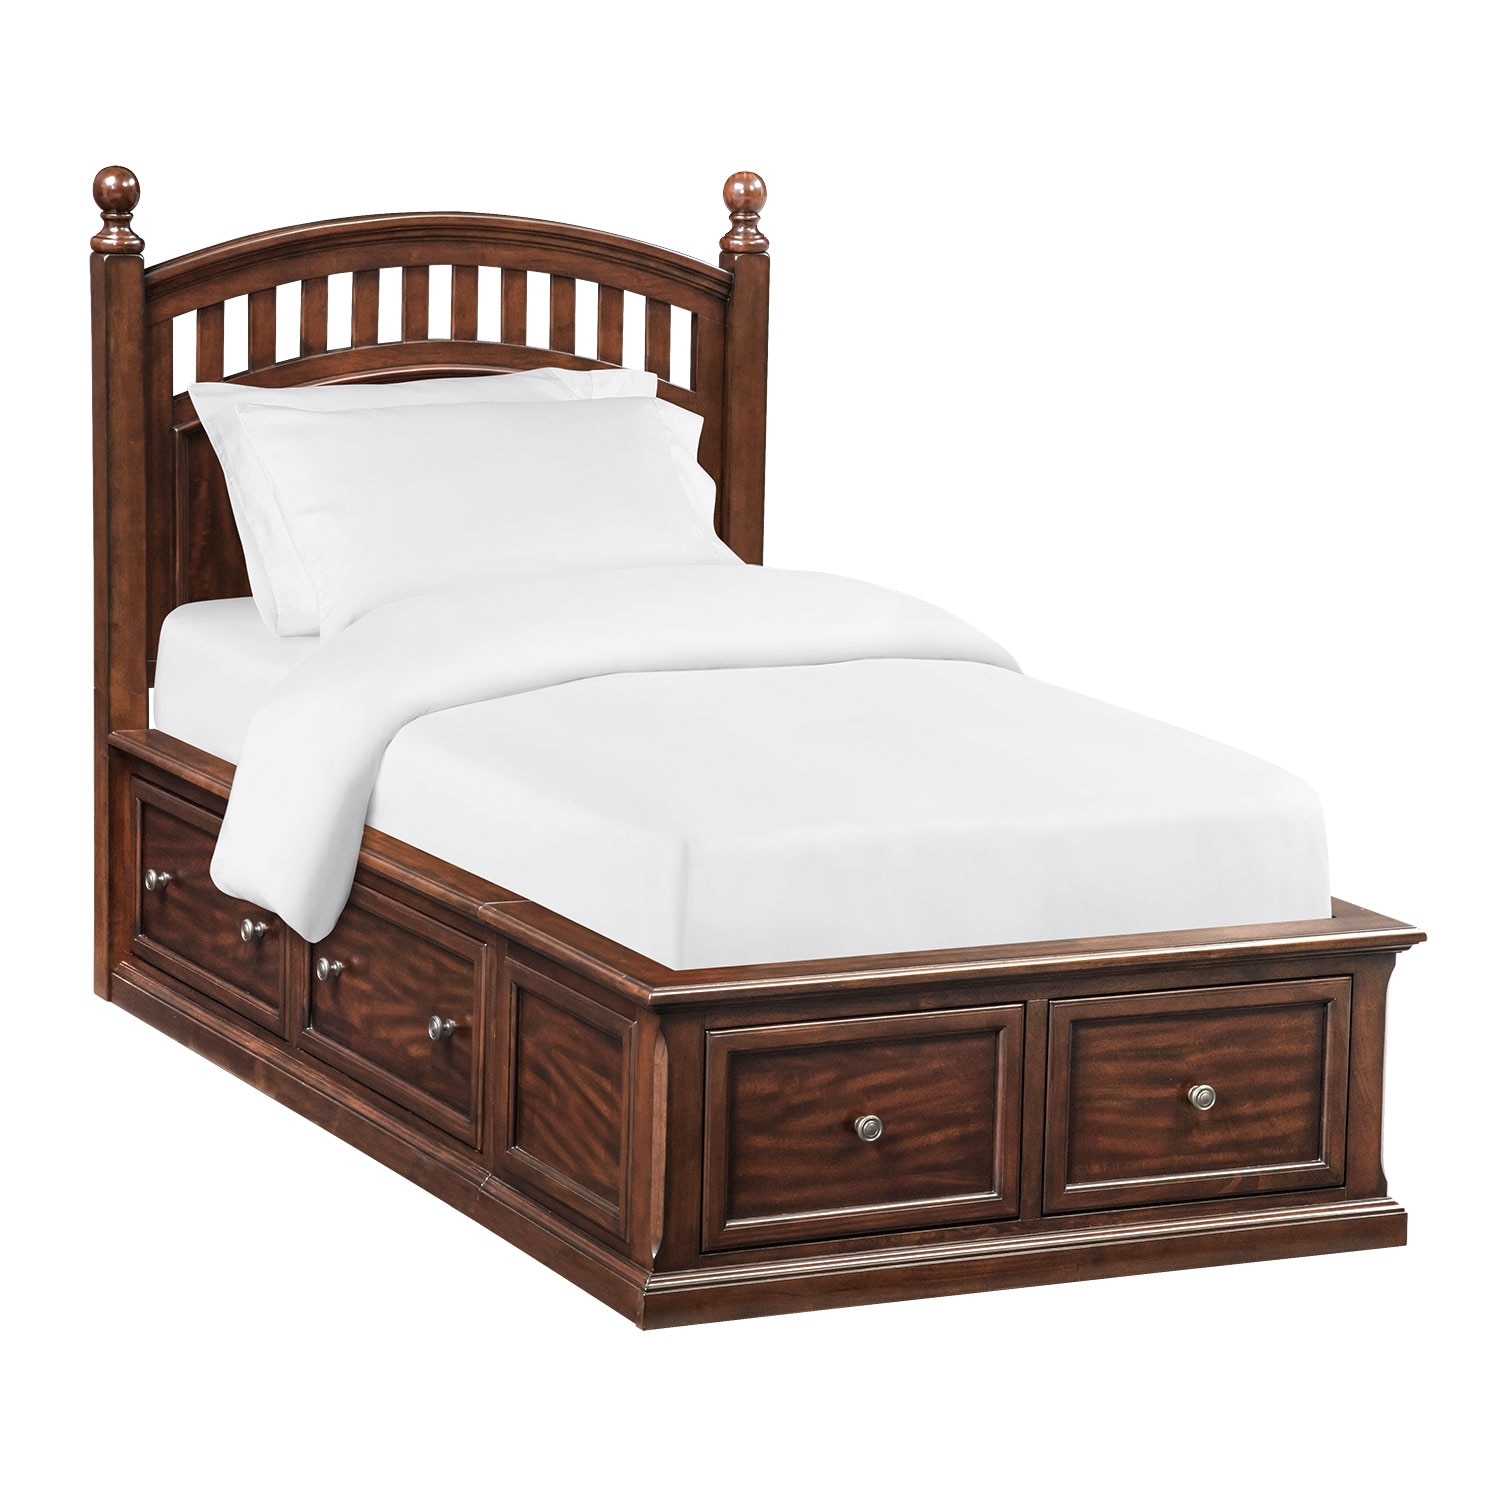 Value City Twin Bed Sets, Value City Furniture Twin Beds